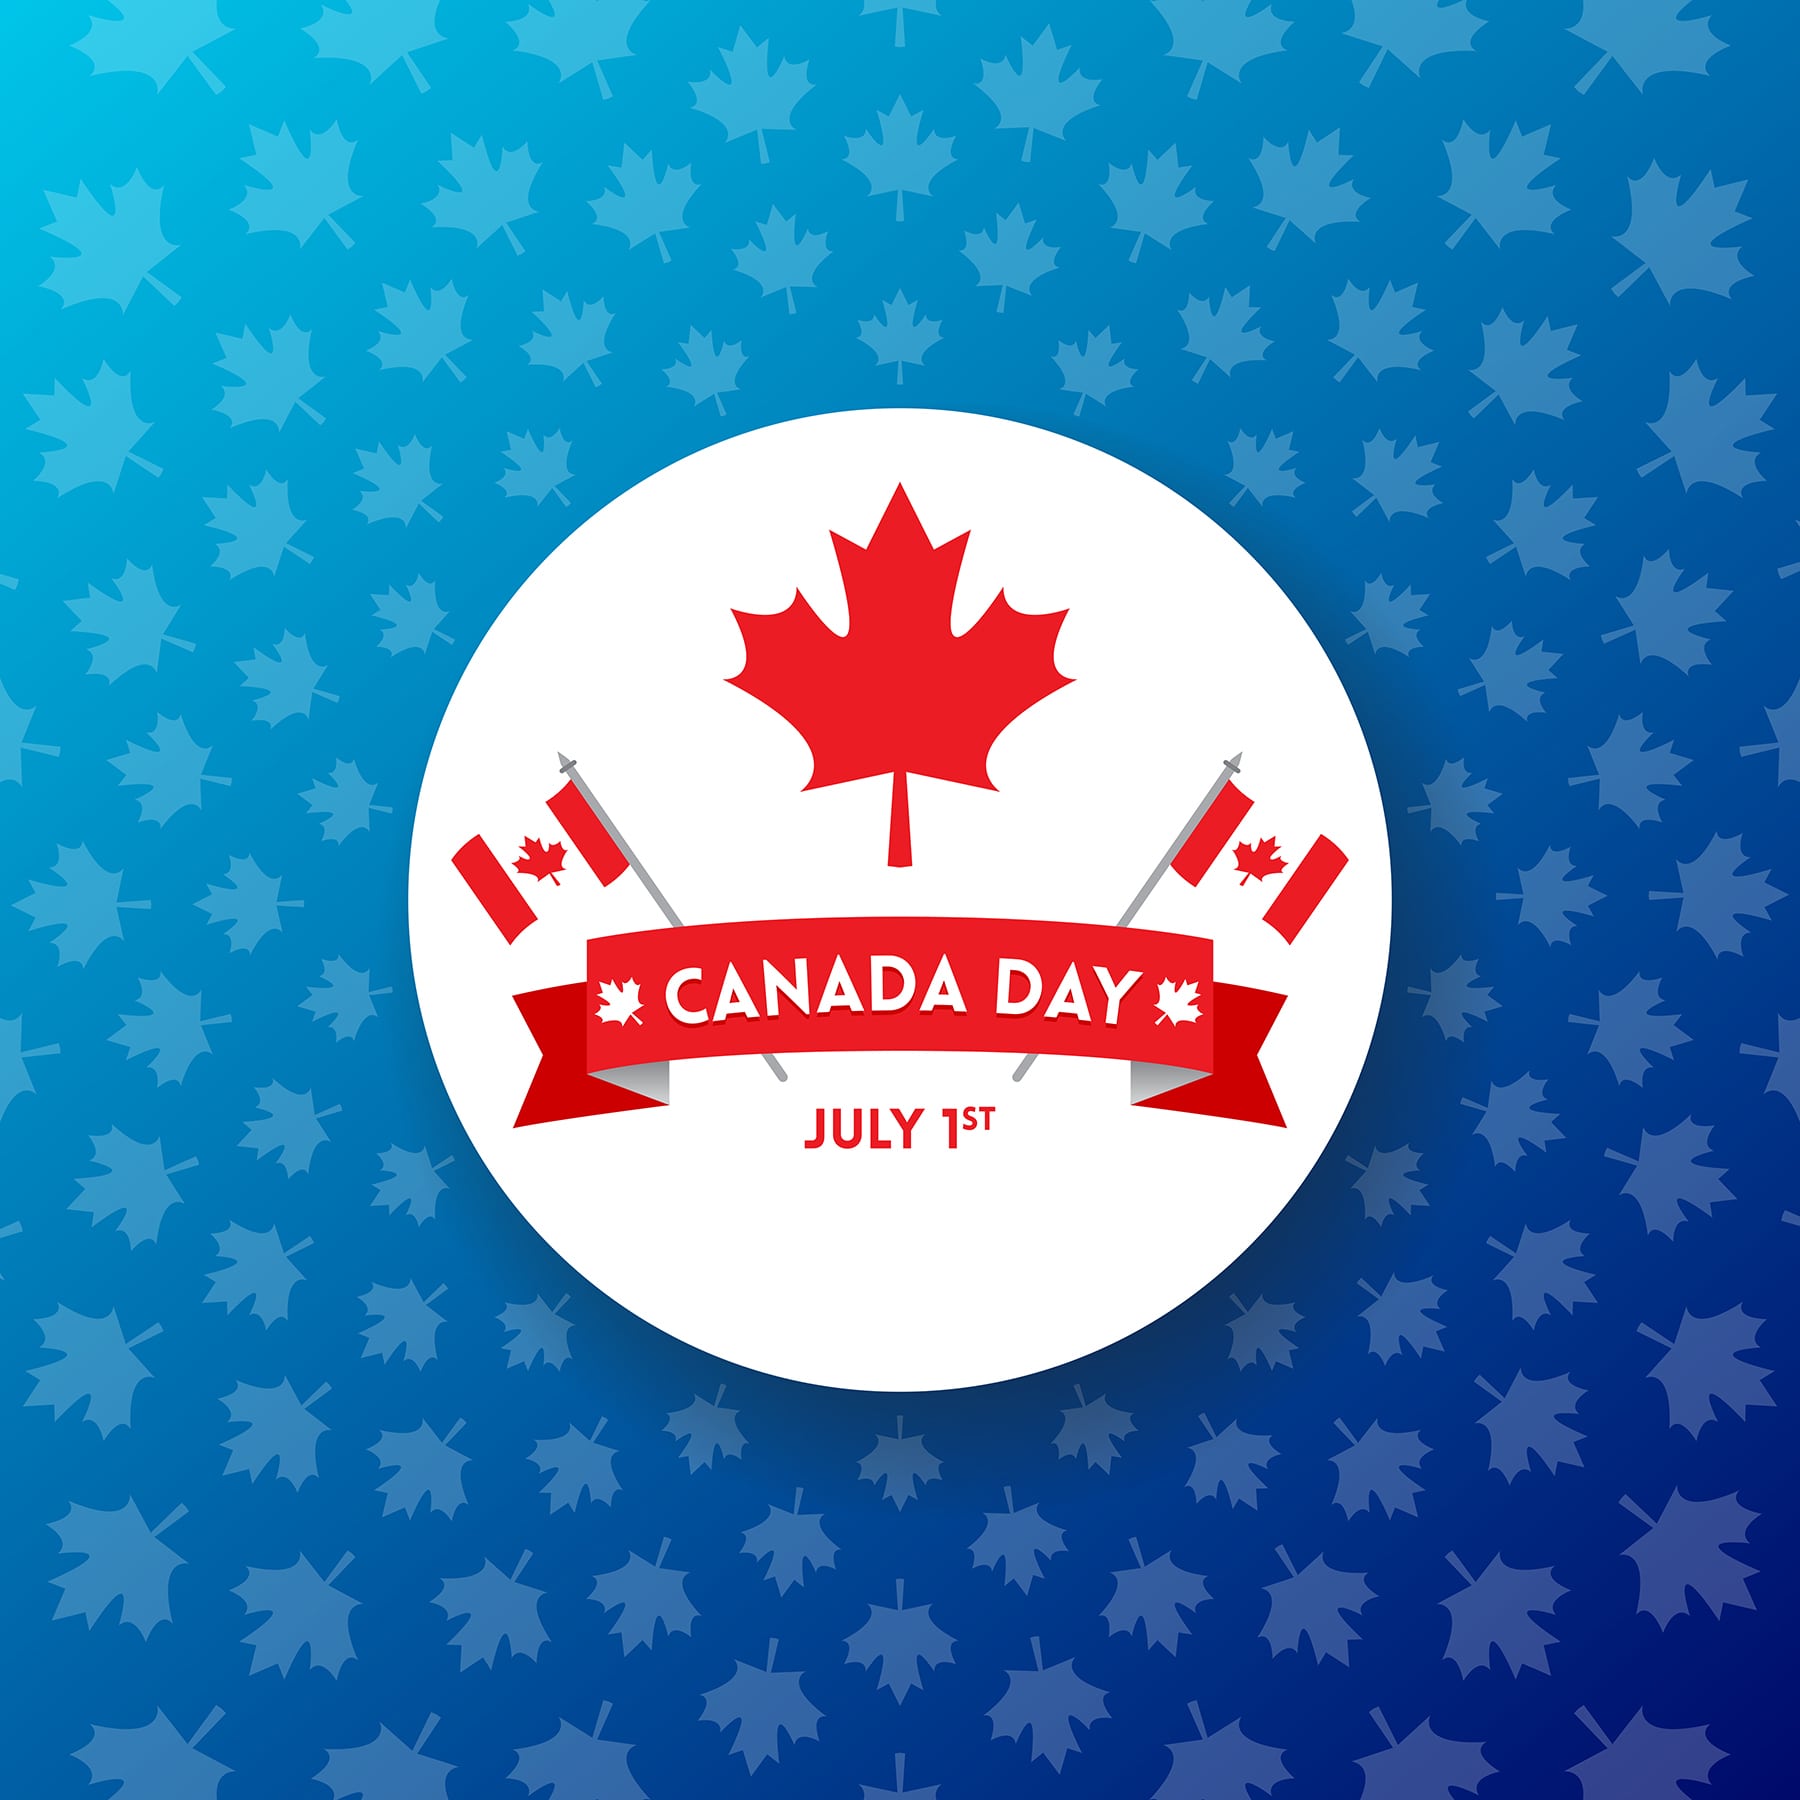 Canada Day free vector graphics on blue background with maple leaf pattern